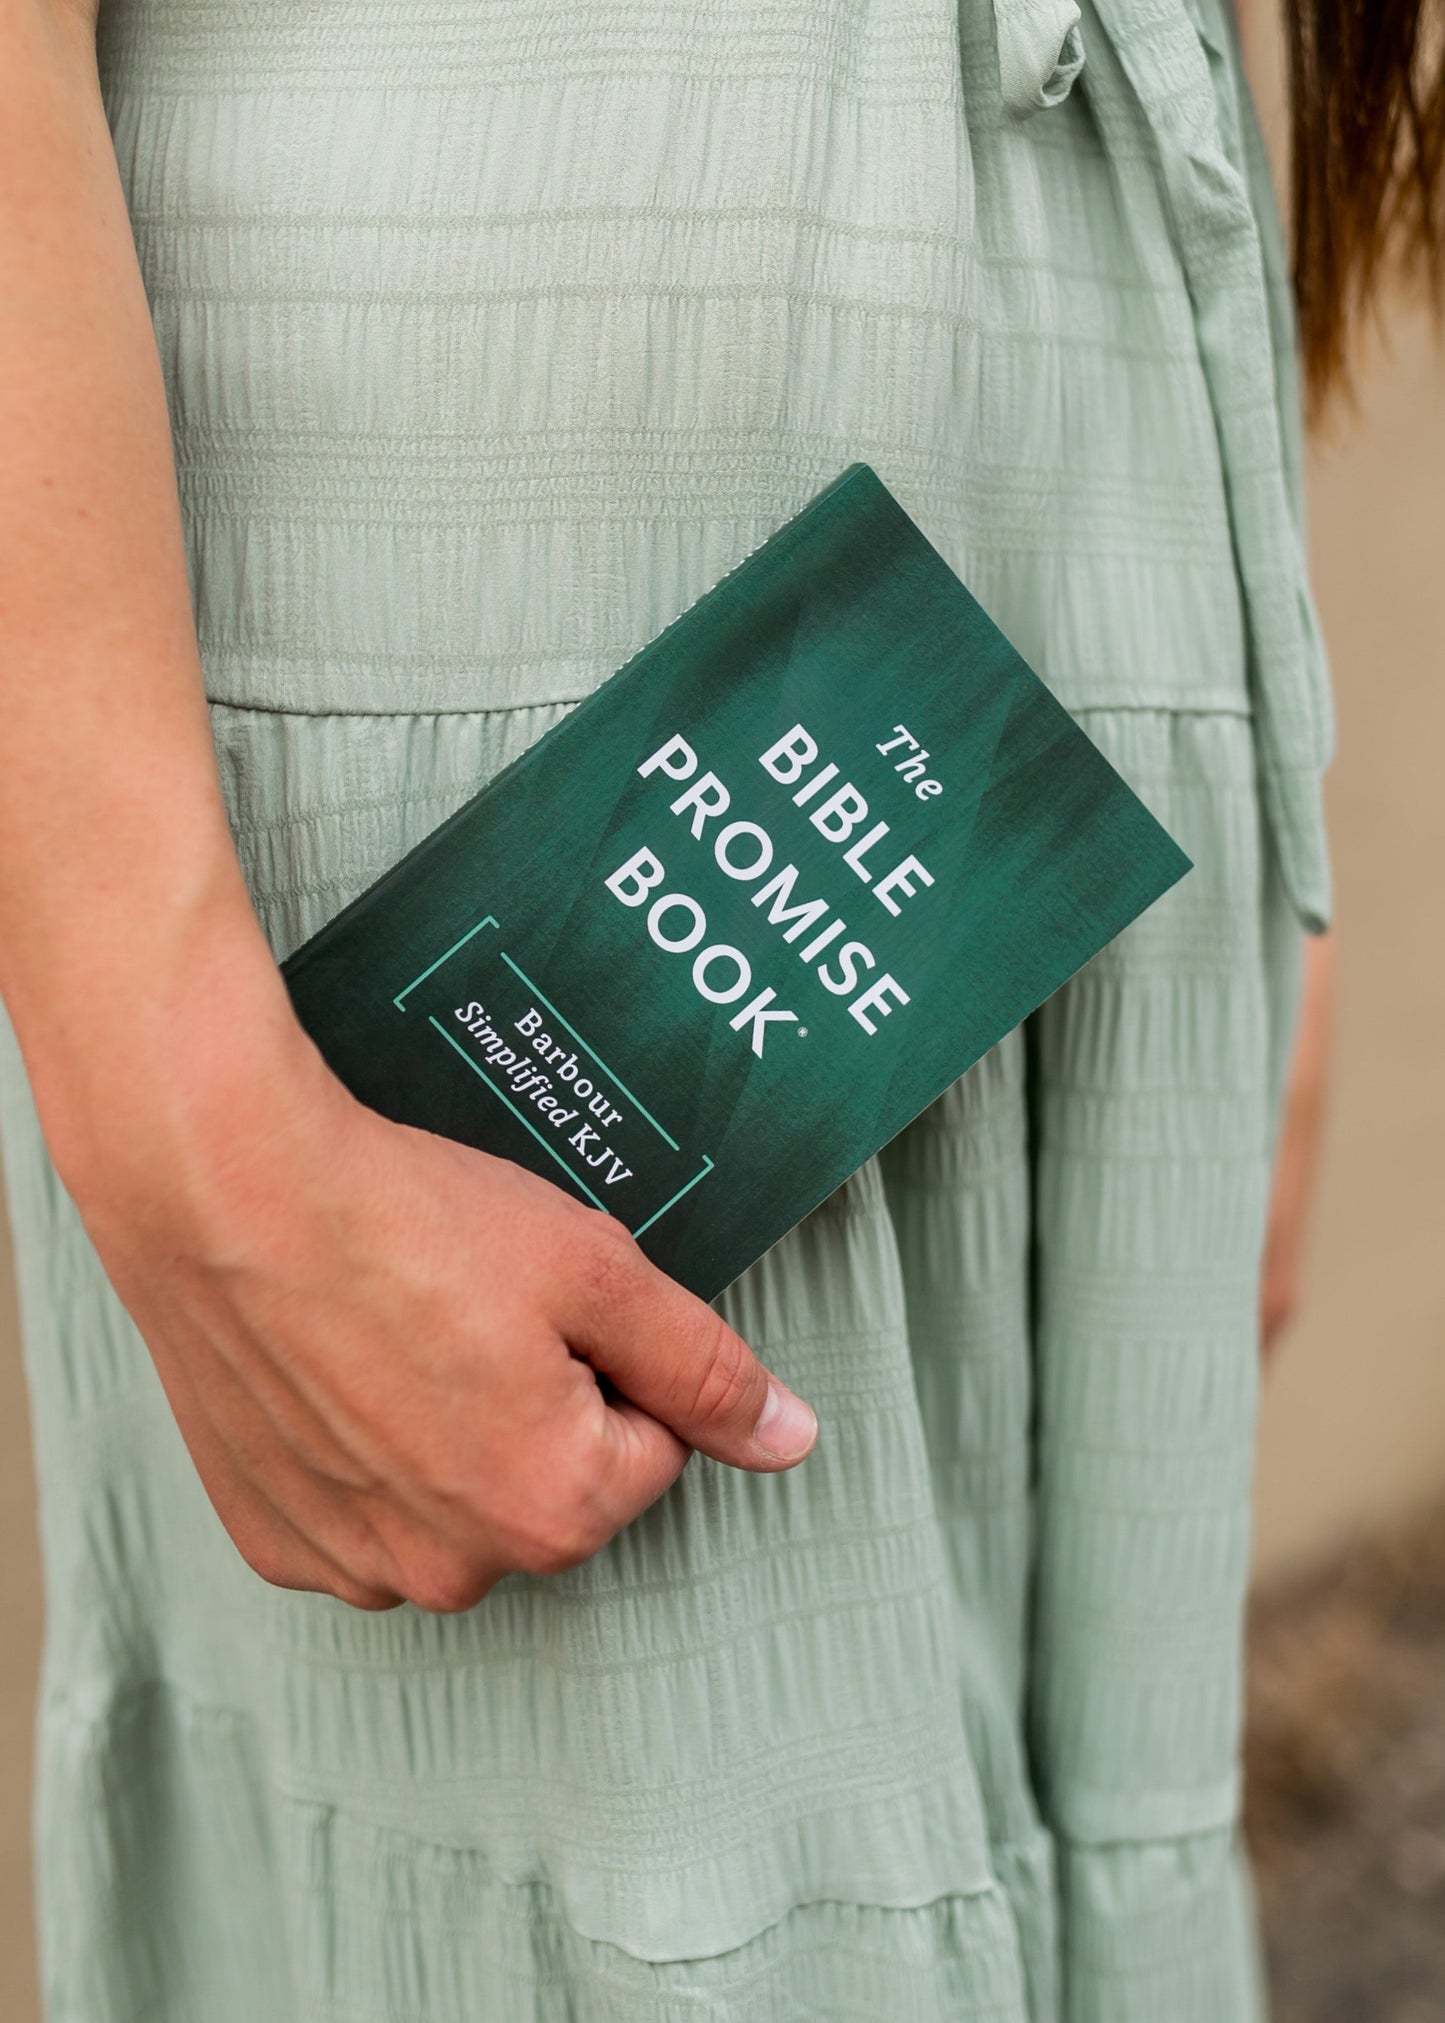 The Bible Promise Book Gifts